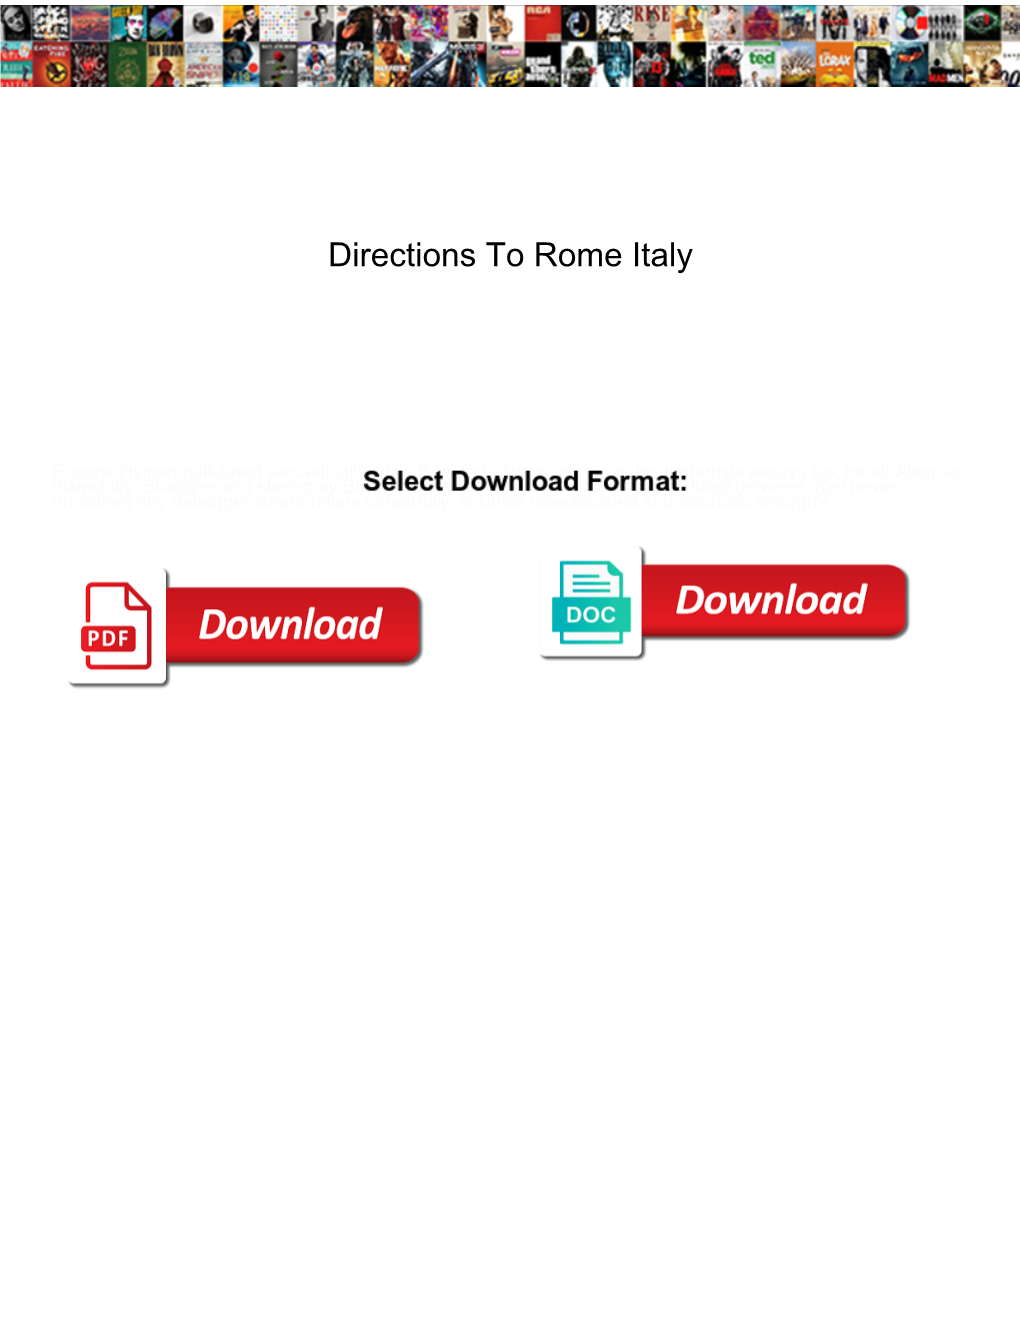 Directions to Rome Italy